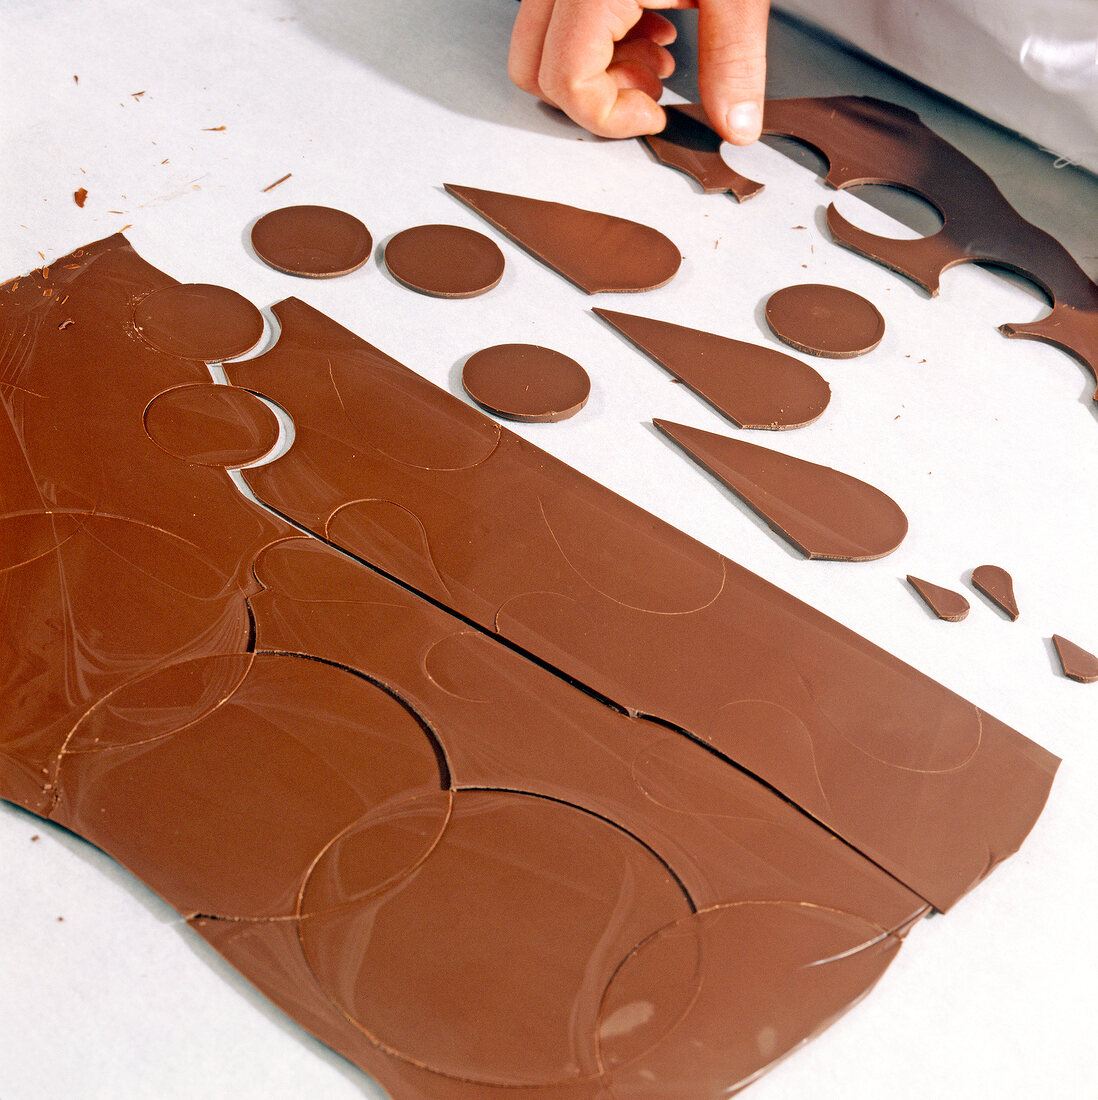 Various shapes cut out from chocolate, step 2